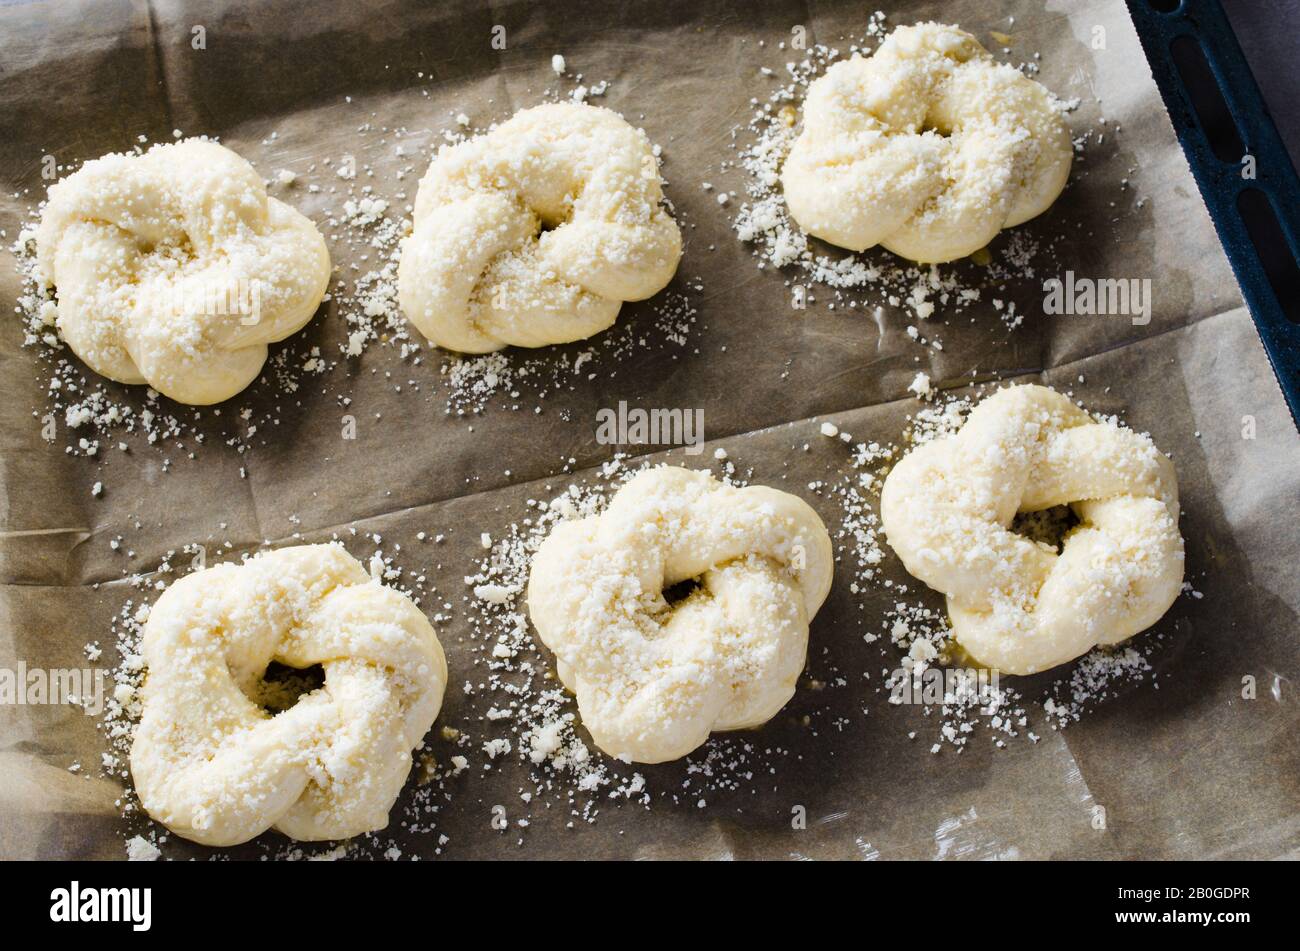 Preparation process - raw unbaked buns. Ready to bake homemade traditional buns on baking paper. Rustic style. Traditional pastry Stock Photo